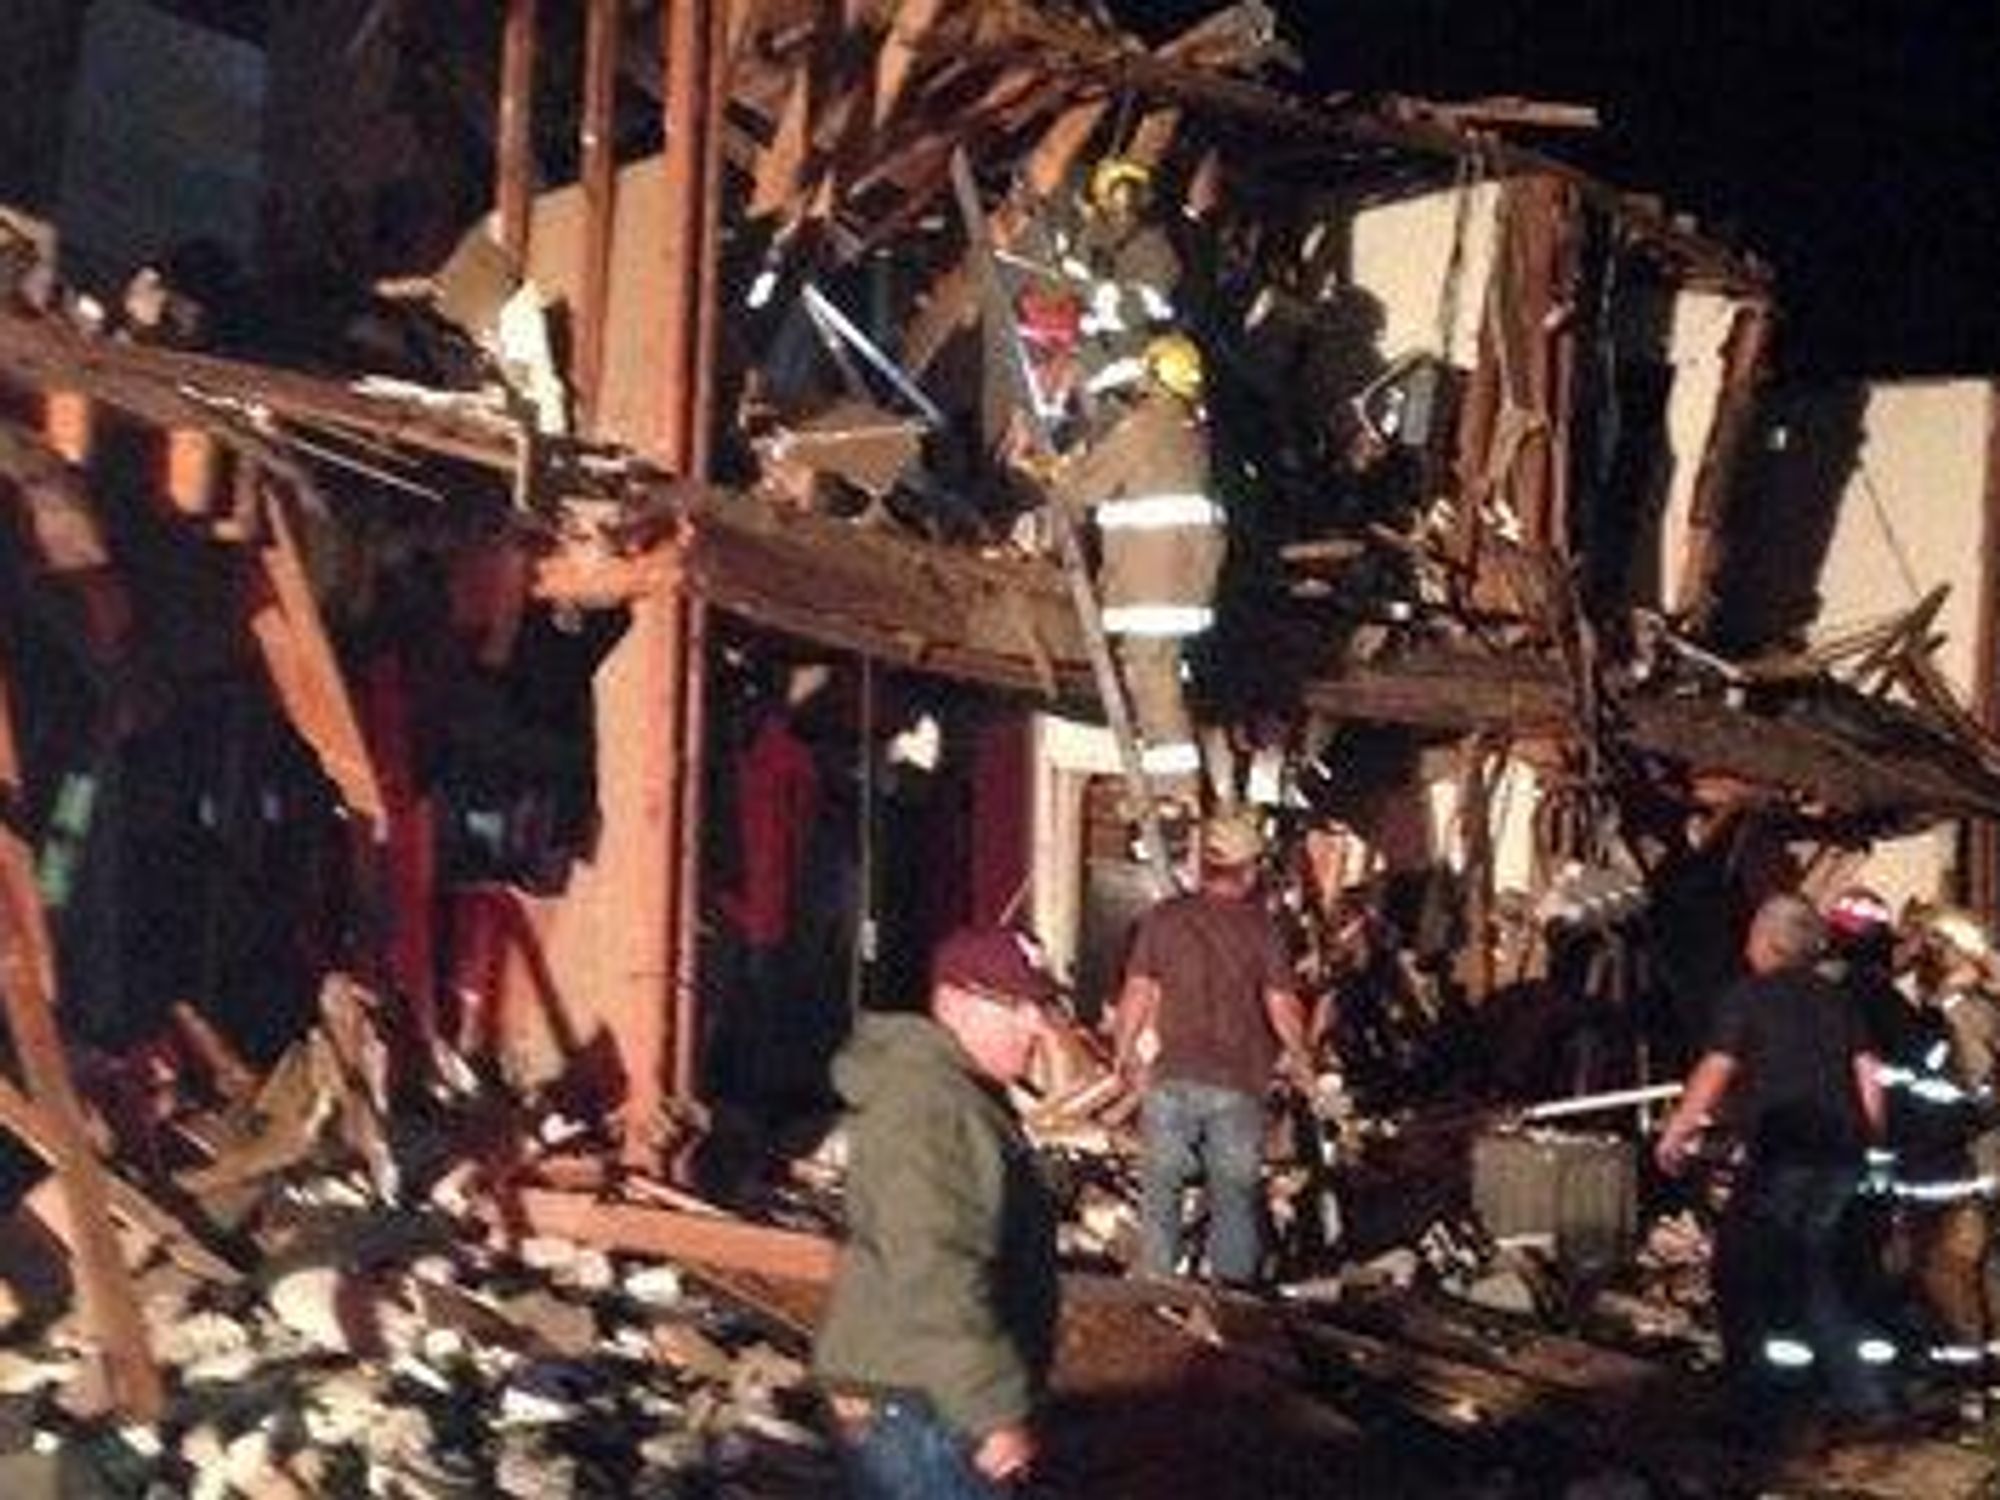 Firefighters search through the rubble in West, Texas